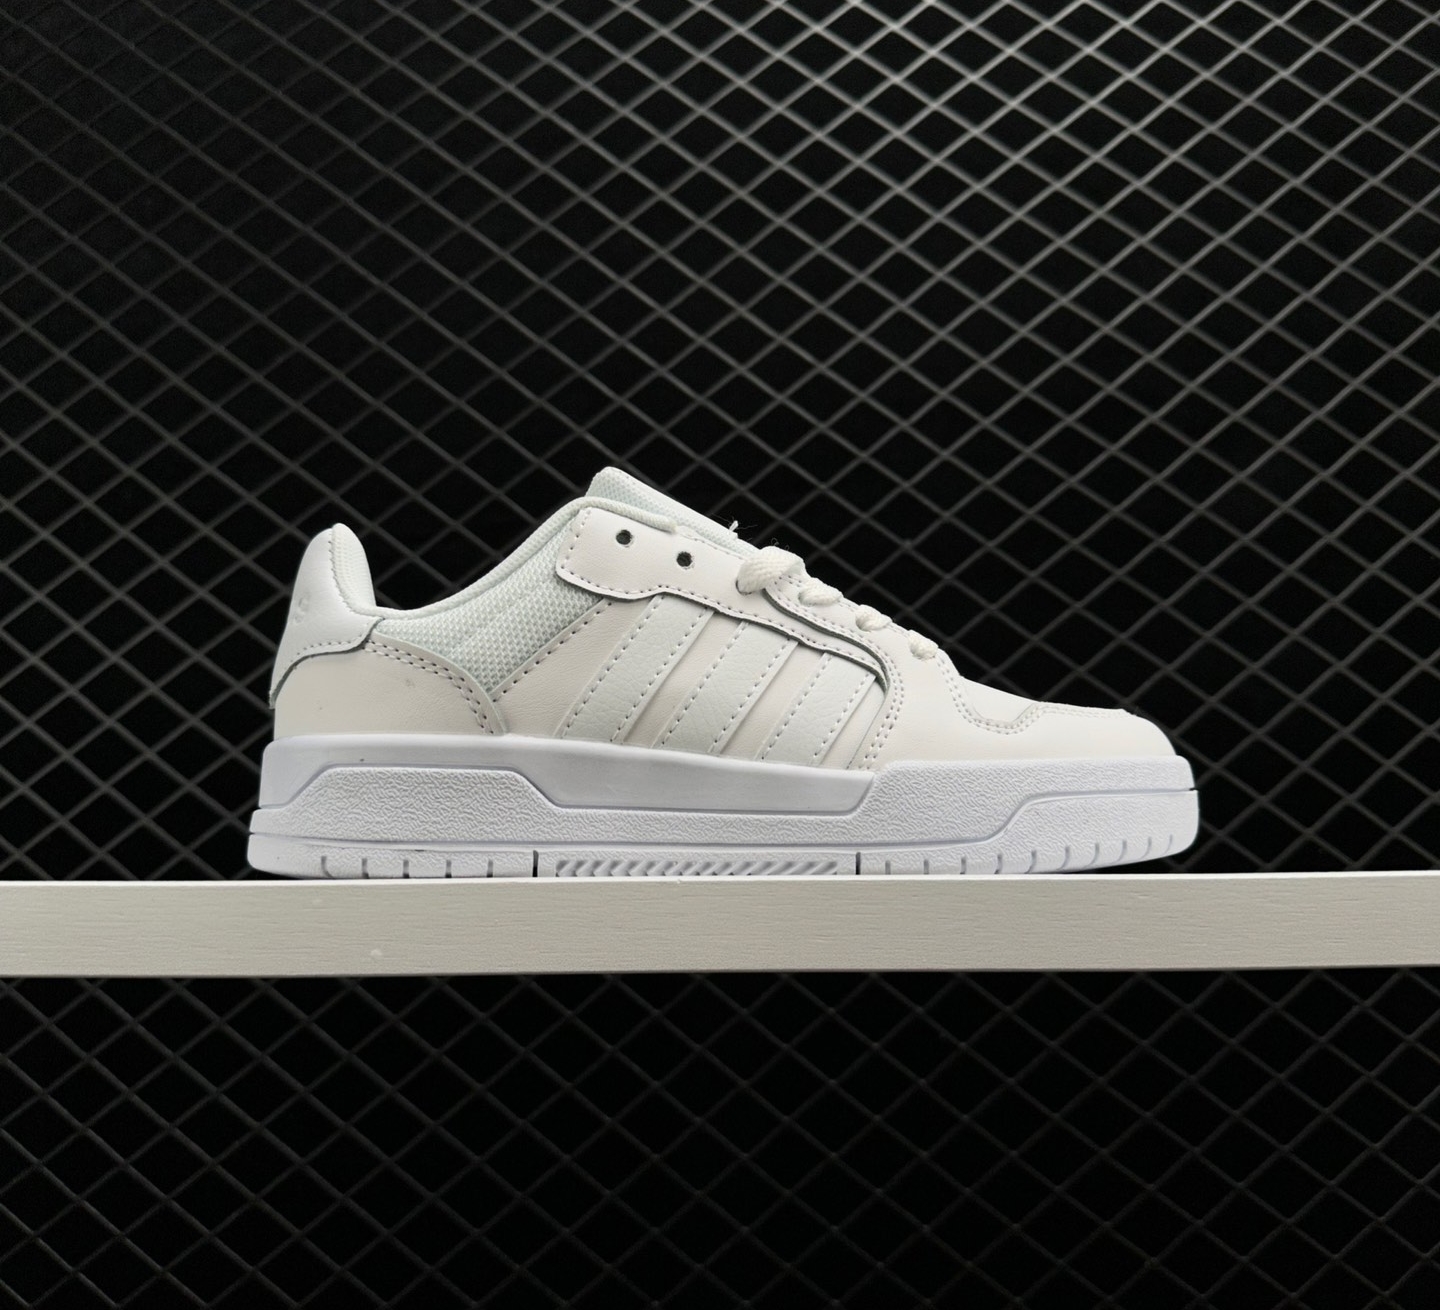 Adidas Neo Entrap White – Classic Style and Effortless Elegance